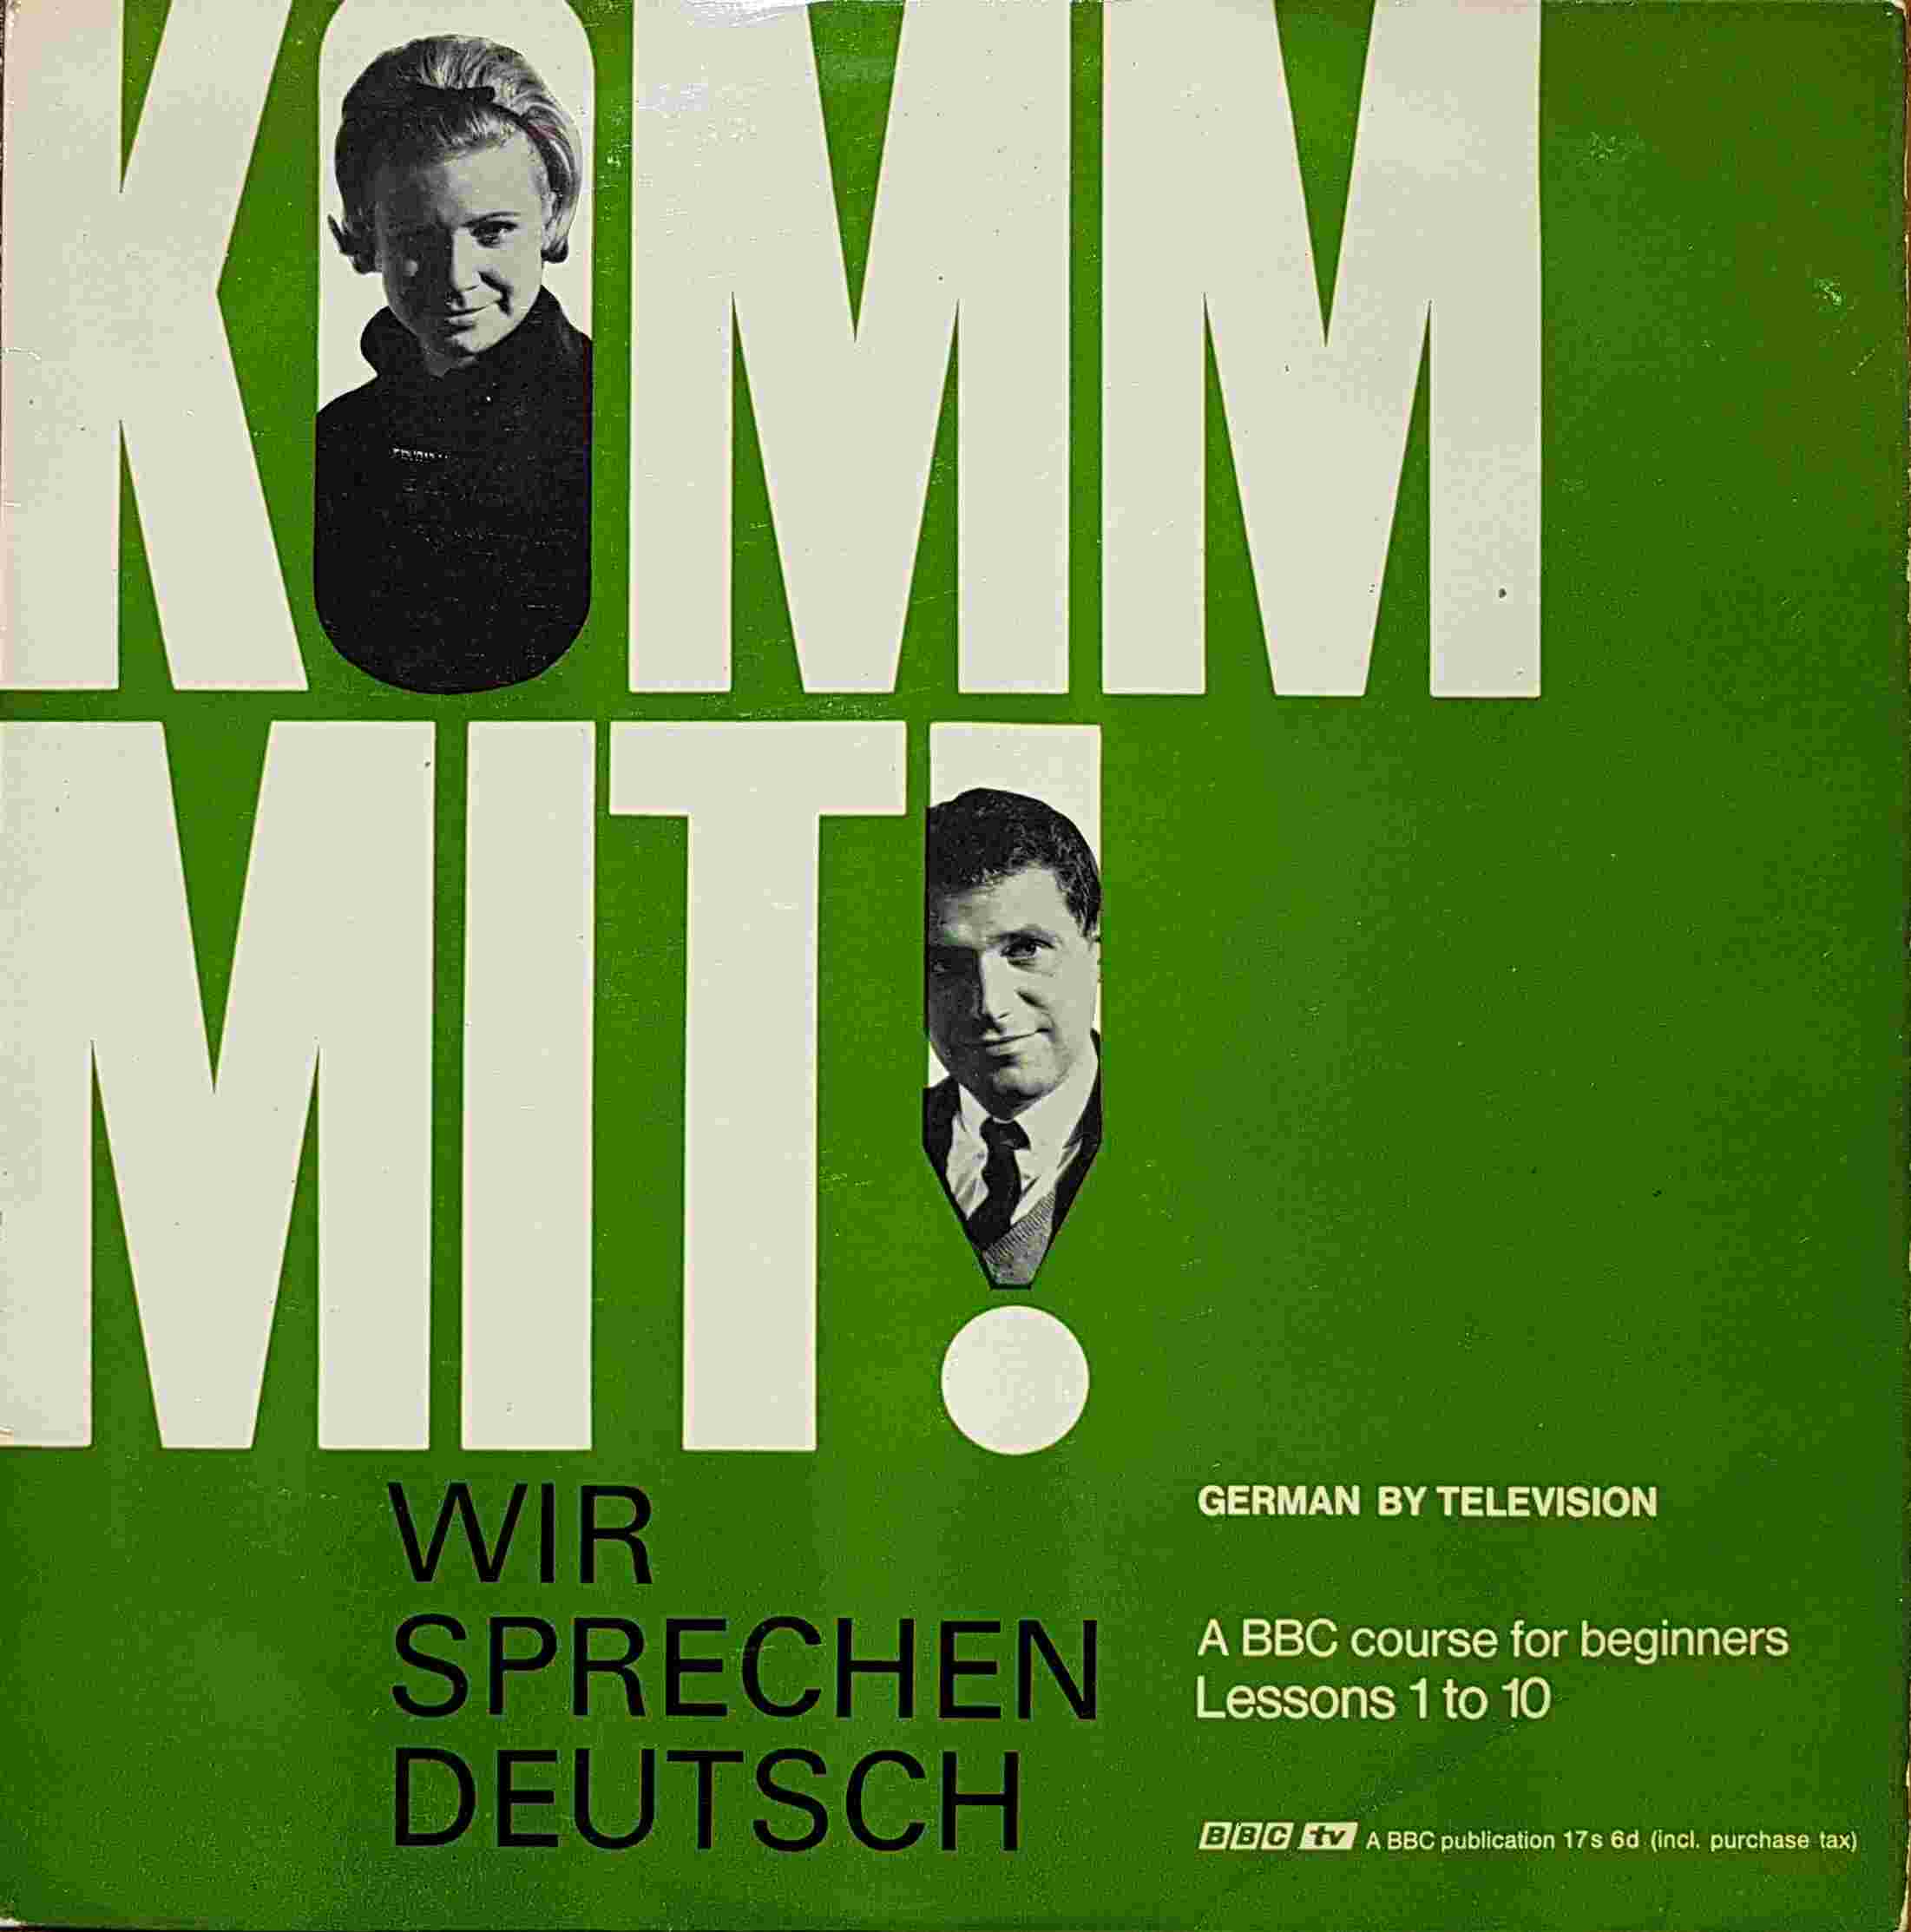 Picture of OP 9/10 Komm mit! Wir sprechen Deutsch - A BBC course for beginners lessons 1 - 10 by artist John L. M. Trim / Frank Kuna from the BBC albums - Records and Tapes library